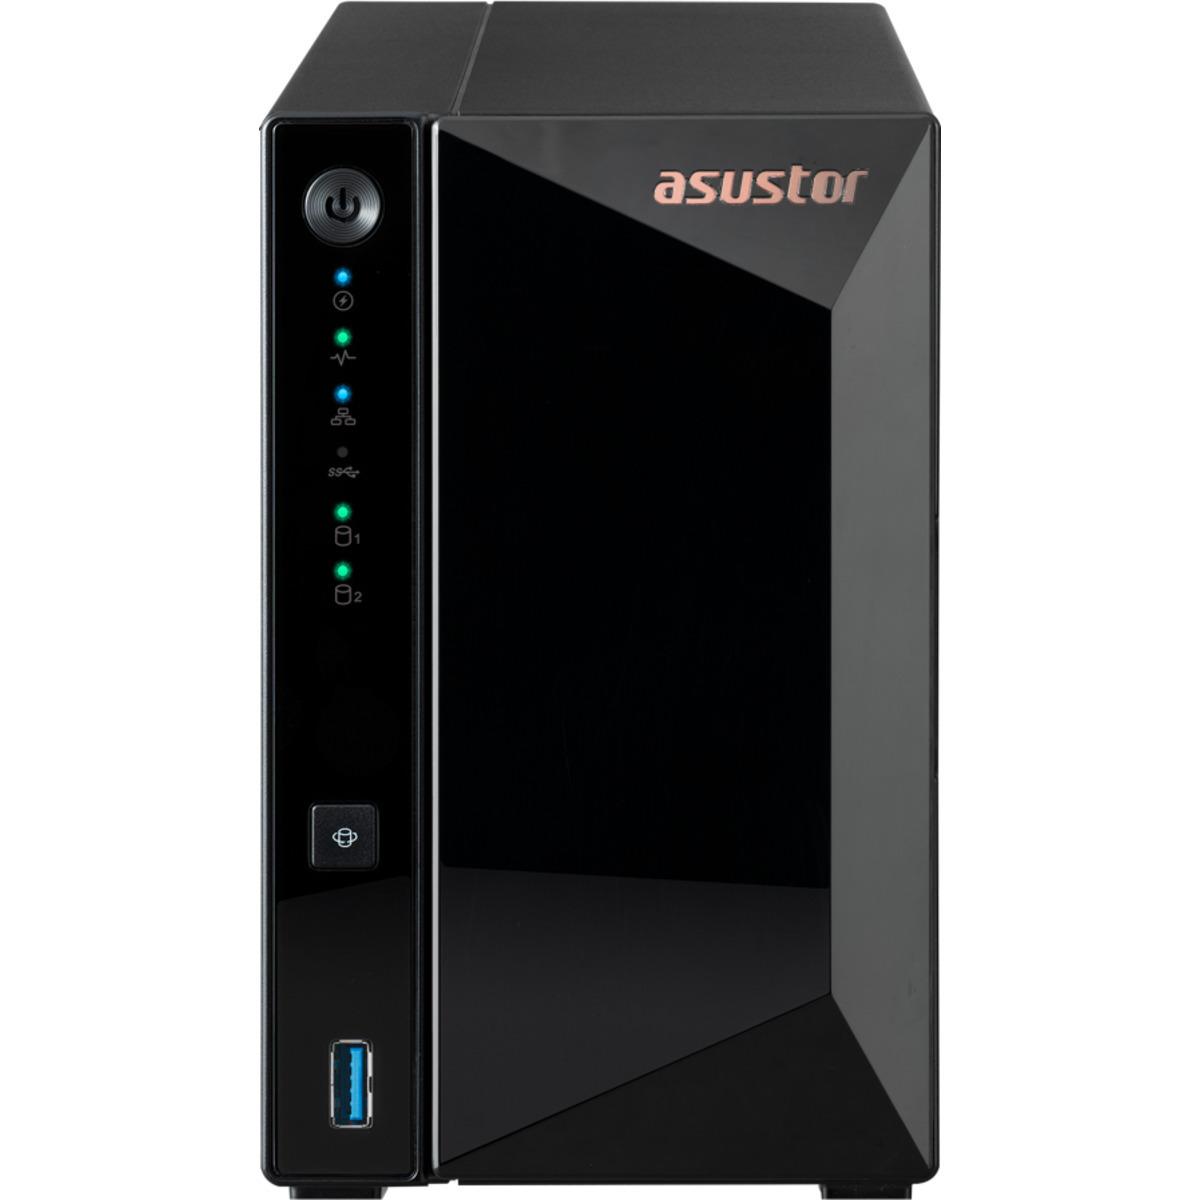 ASUSTOR DRIVESTOR 2 Pro AS3302T 24tb 2-Bay Desktop Personal / Basic Home / Small Office NAS - Network Attached Storage Device 1x24tb Seagate IronWolf Pro ST24000NT002 3.5 7200rpm SATA 6Gb/s HDD NAS Class Drives Installed - Burn-In Tested DRIVESTOR 2 Pro AS3302T